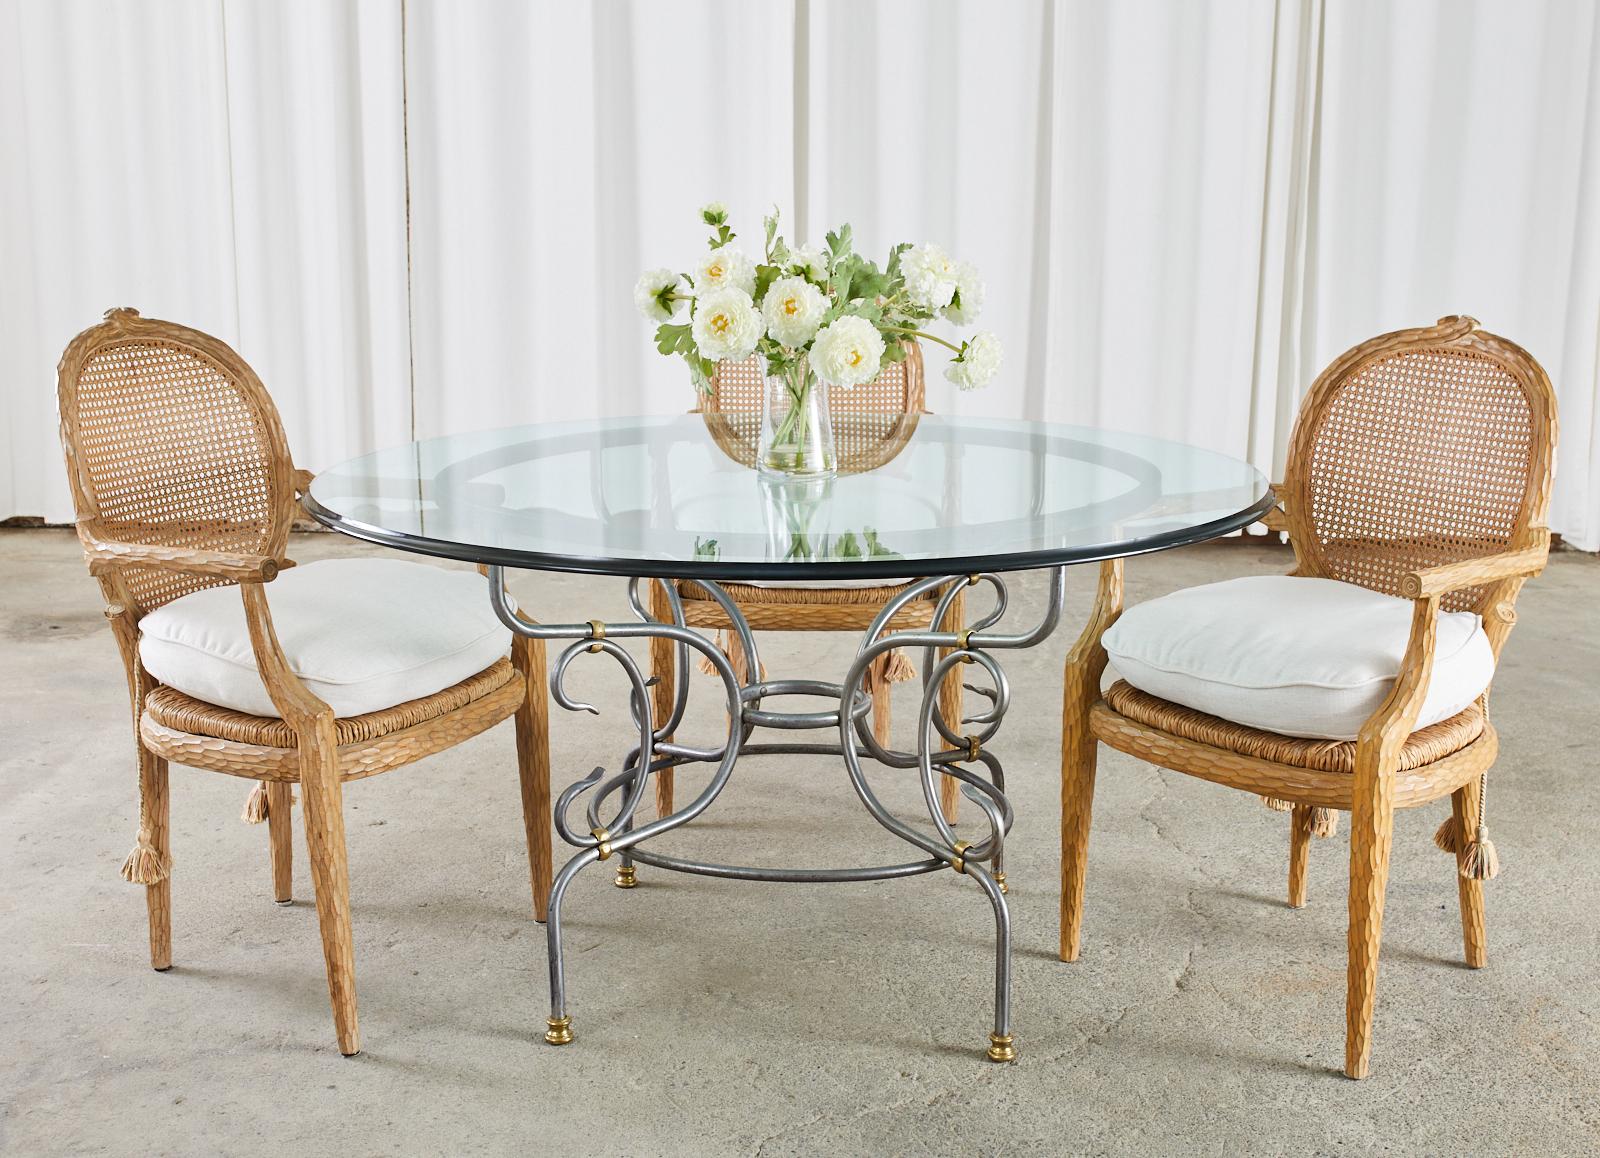 Attractive French polished steel patio and garden dining table with bronze mounts. The table features a steel base with gracefully curved legs conjoined by round stretchers and scrolls. The base has a beautiful finish with a nickel like patina and